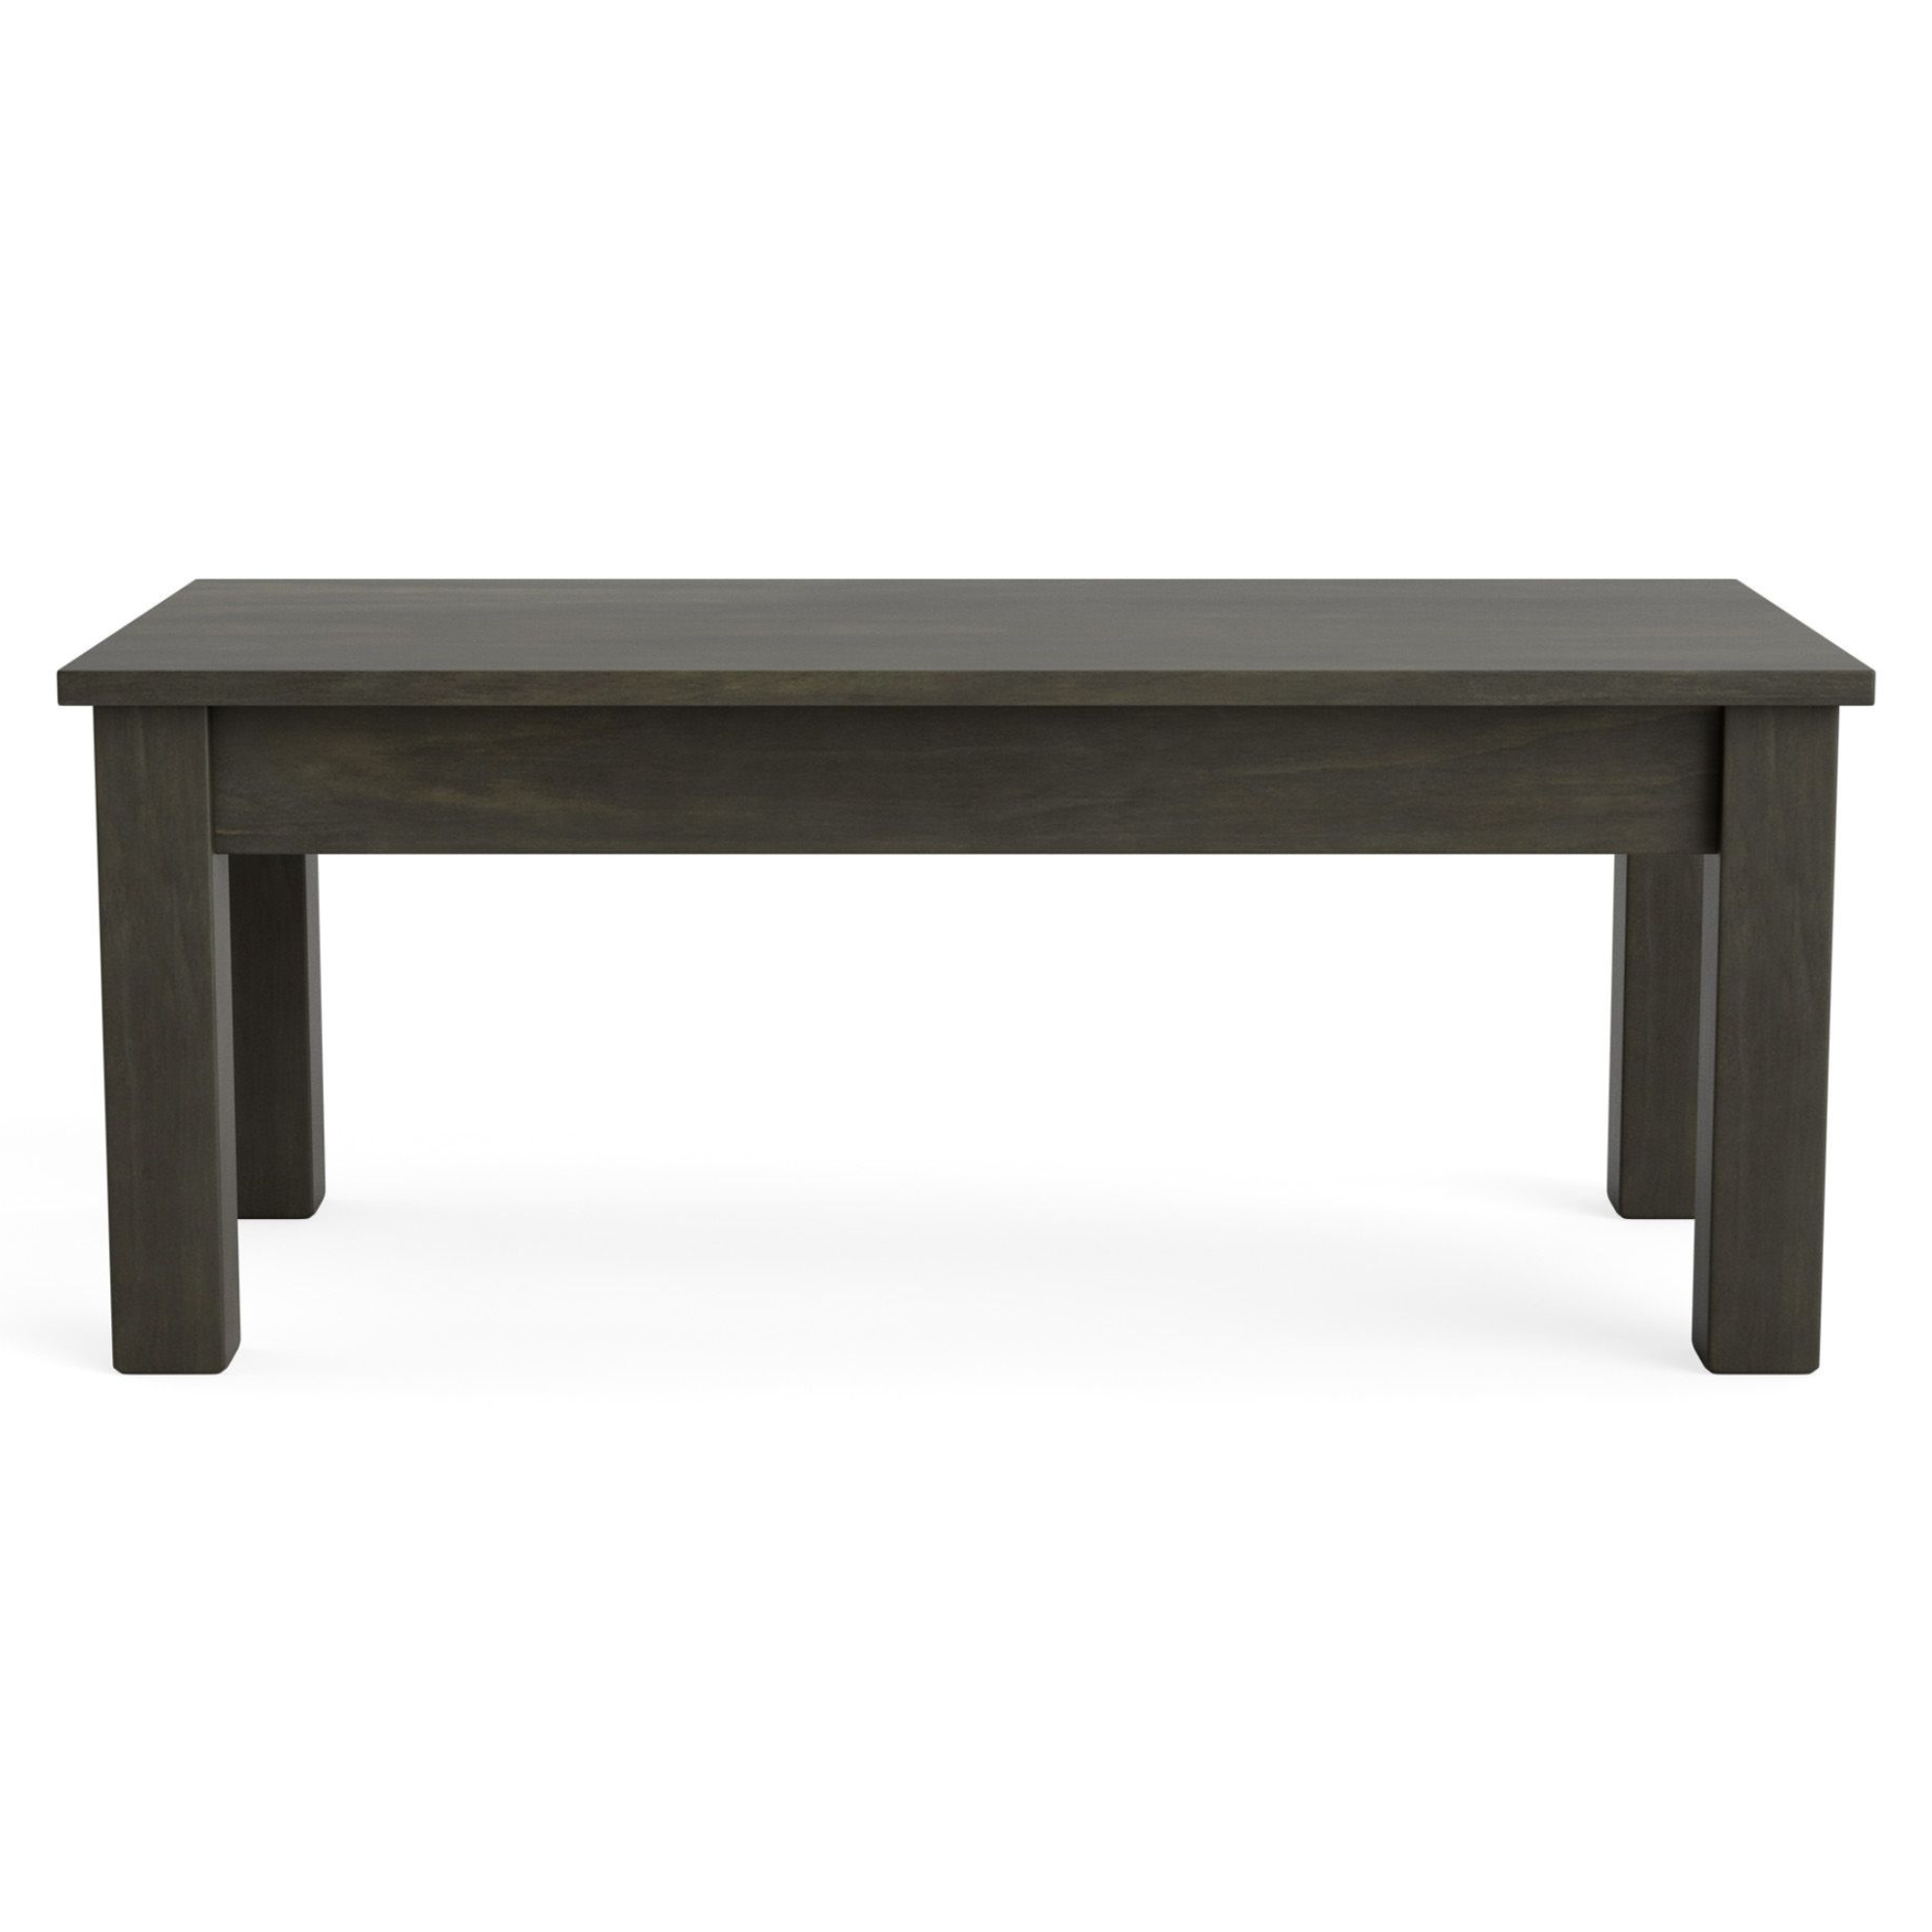 CHARLTON SOLID TIMBER COFFEE TABLE | NZ MADE